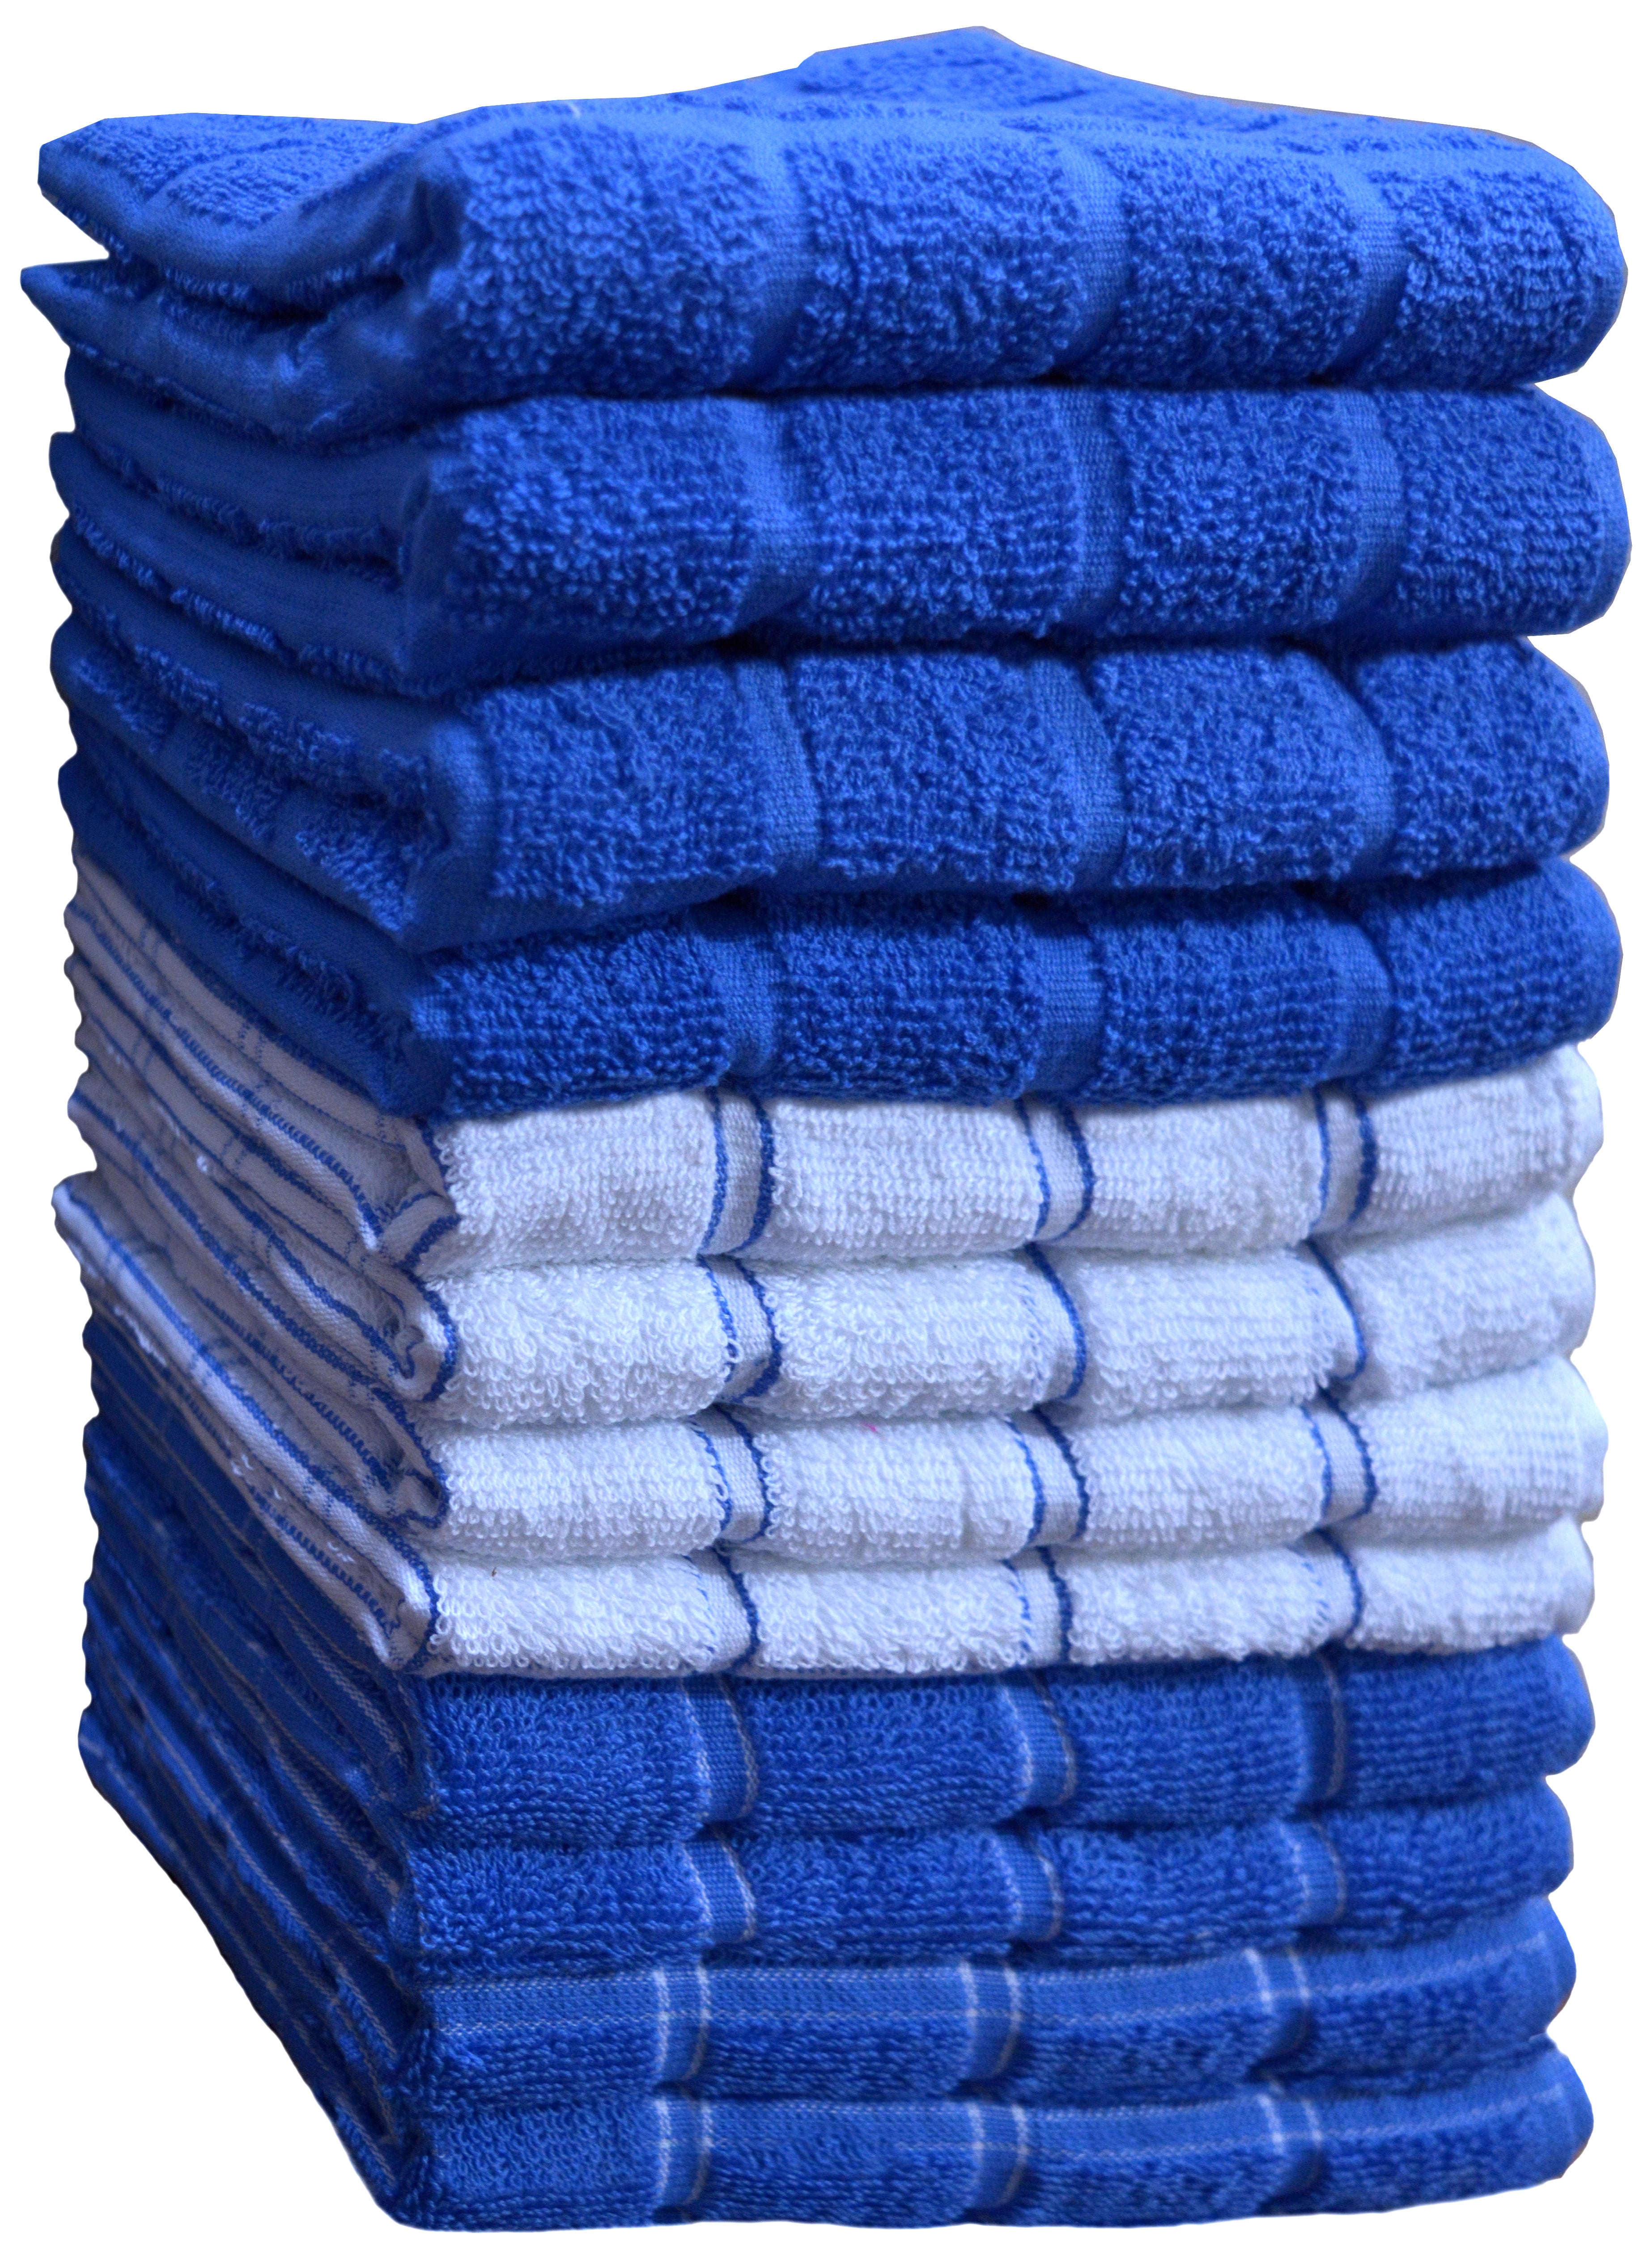 Piccocasa 100% Cotton Kitchen Towel Cleaning Drying Absorbent Dish Towels 6 Pcs Blue 13 x 29